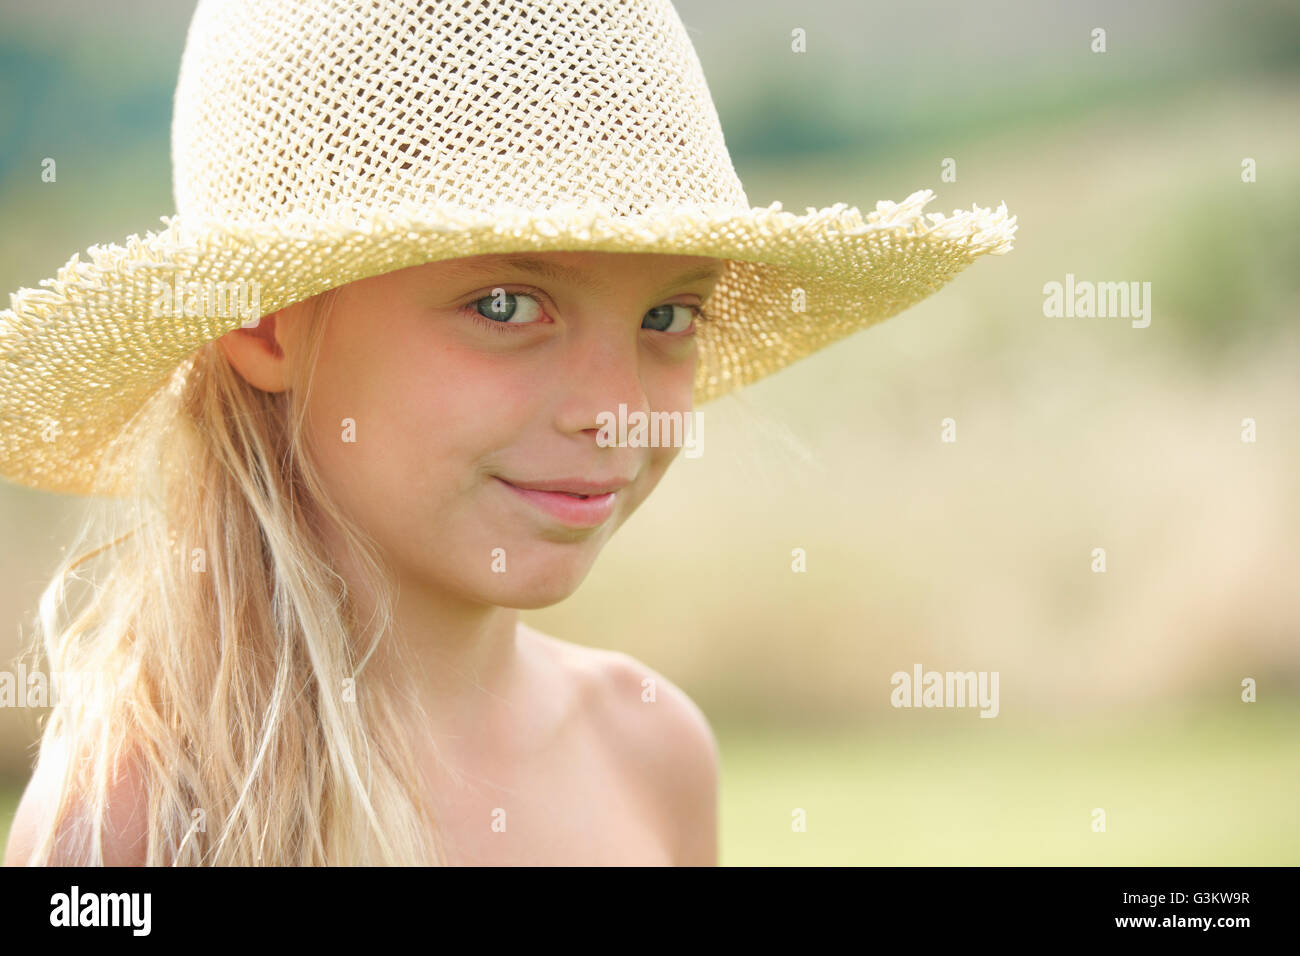 Portrait of young girl outdoors, wearing straw hat Stock Photo